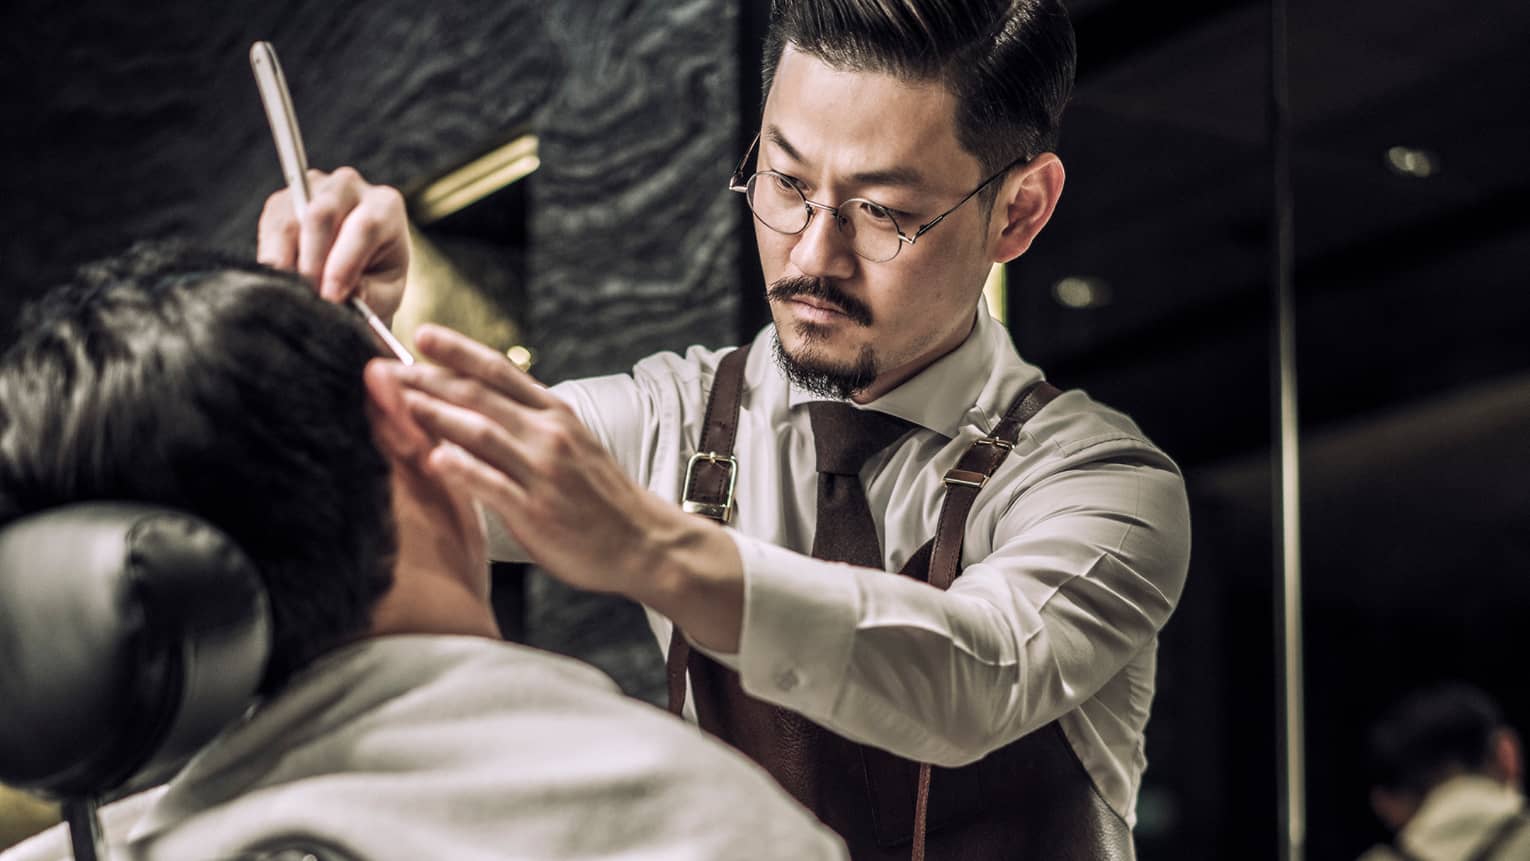 Barber wearing tie, apron combs man's hair as he sits in barber's chair